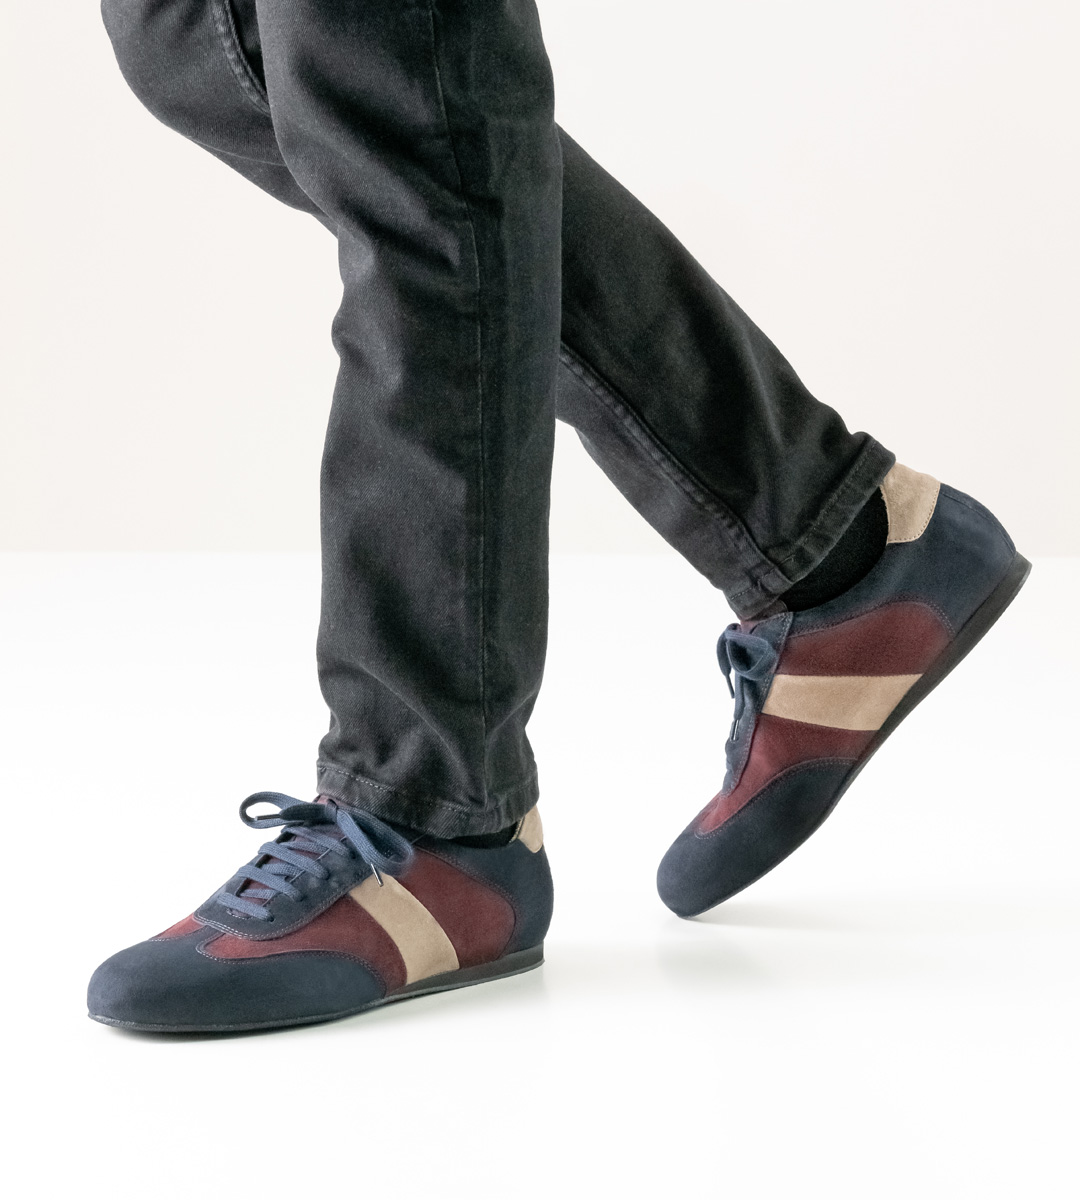 three-coloured men's dance shoe by Kern Werner for loose insoles